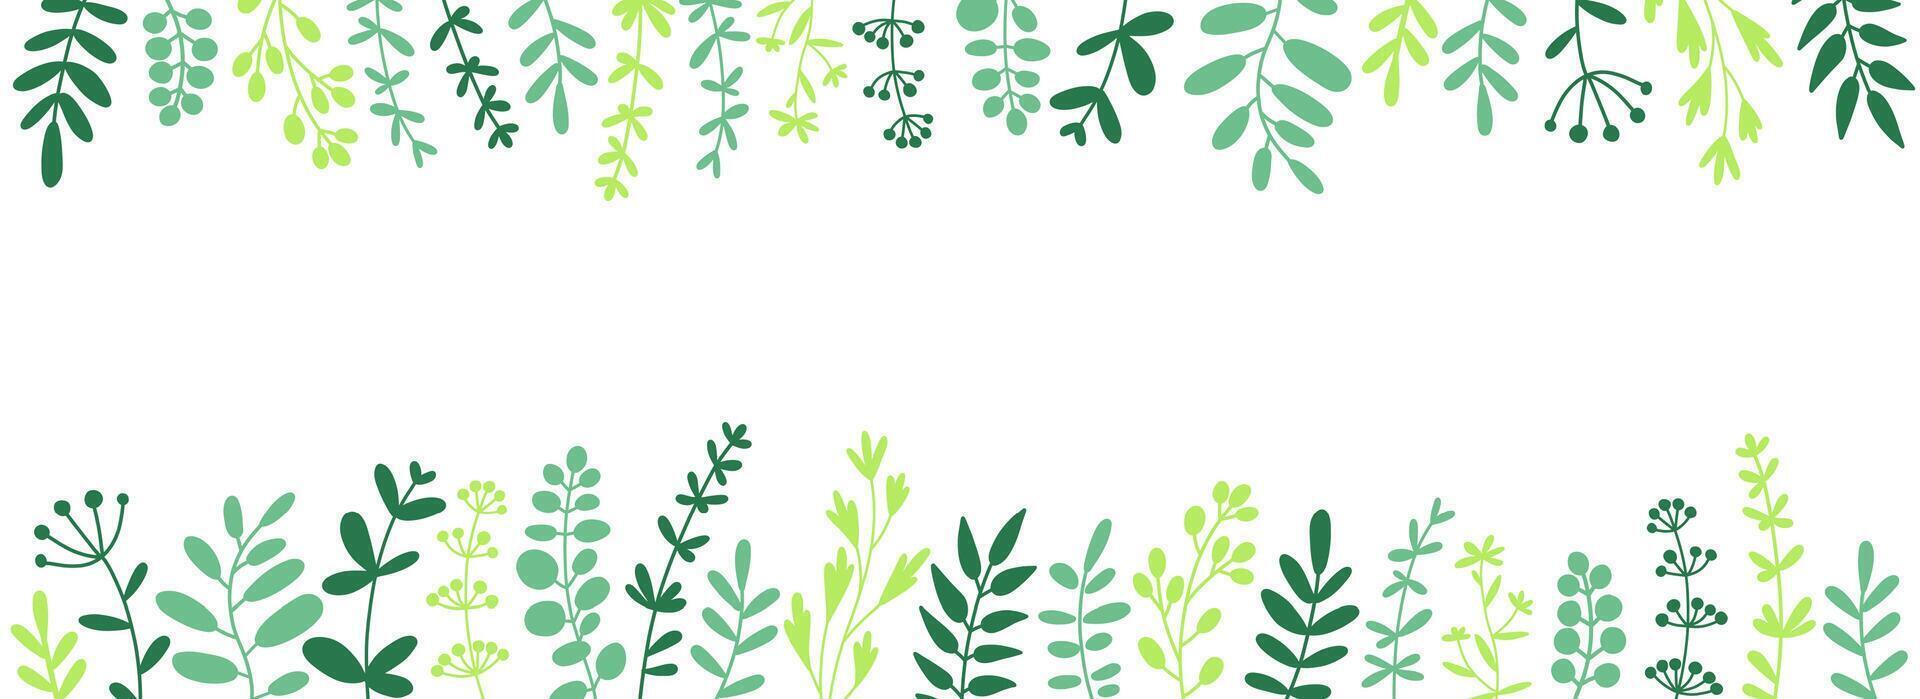 Herbs, twigs and leaves. Herbal border, horizontal top and bottom edgings. vector